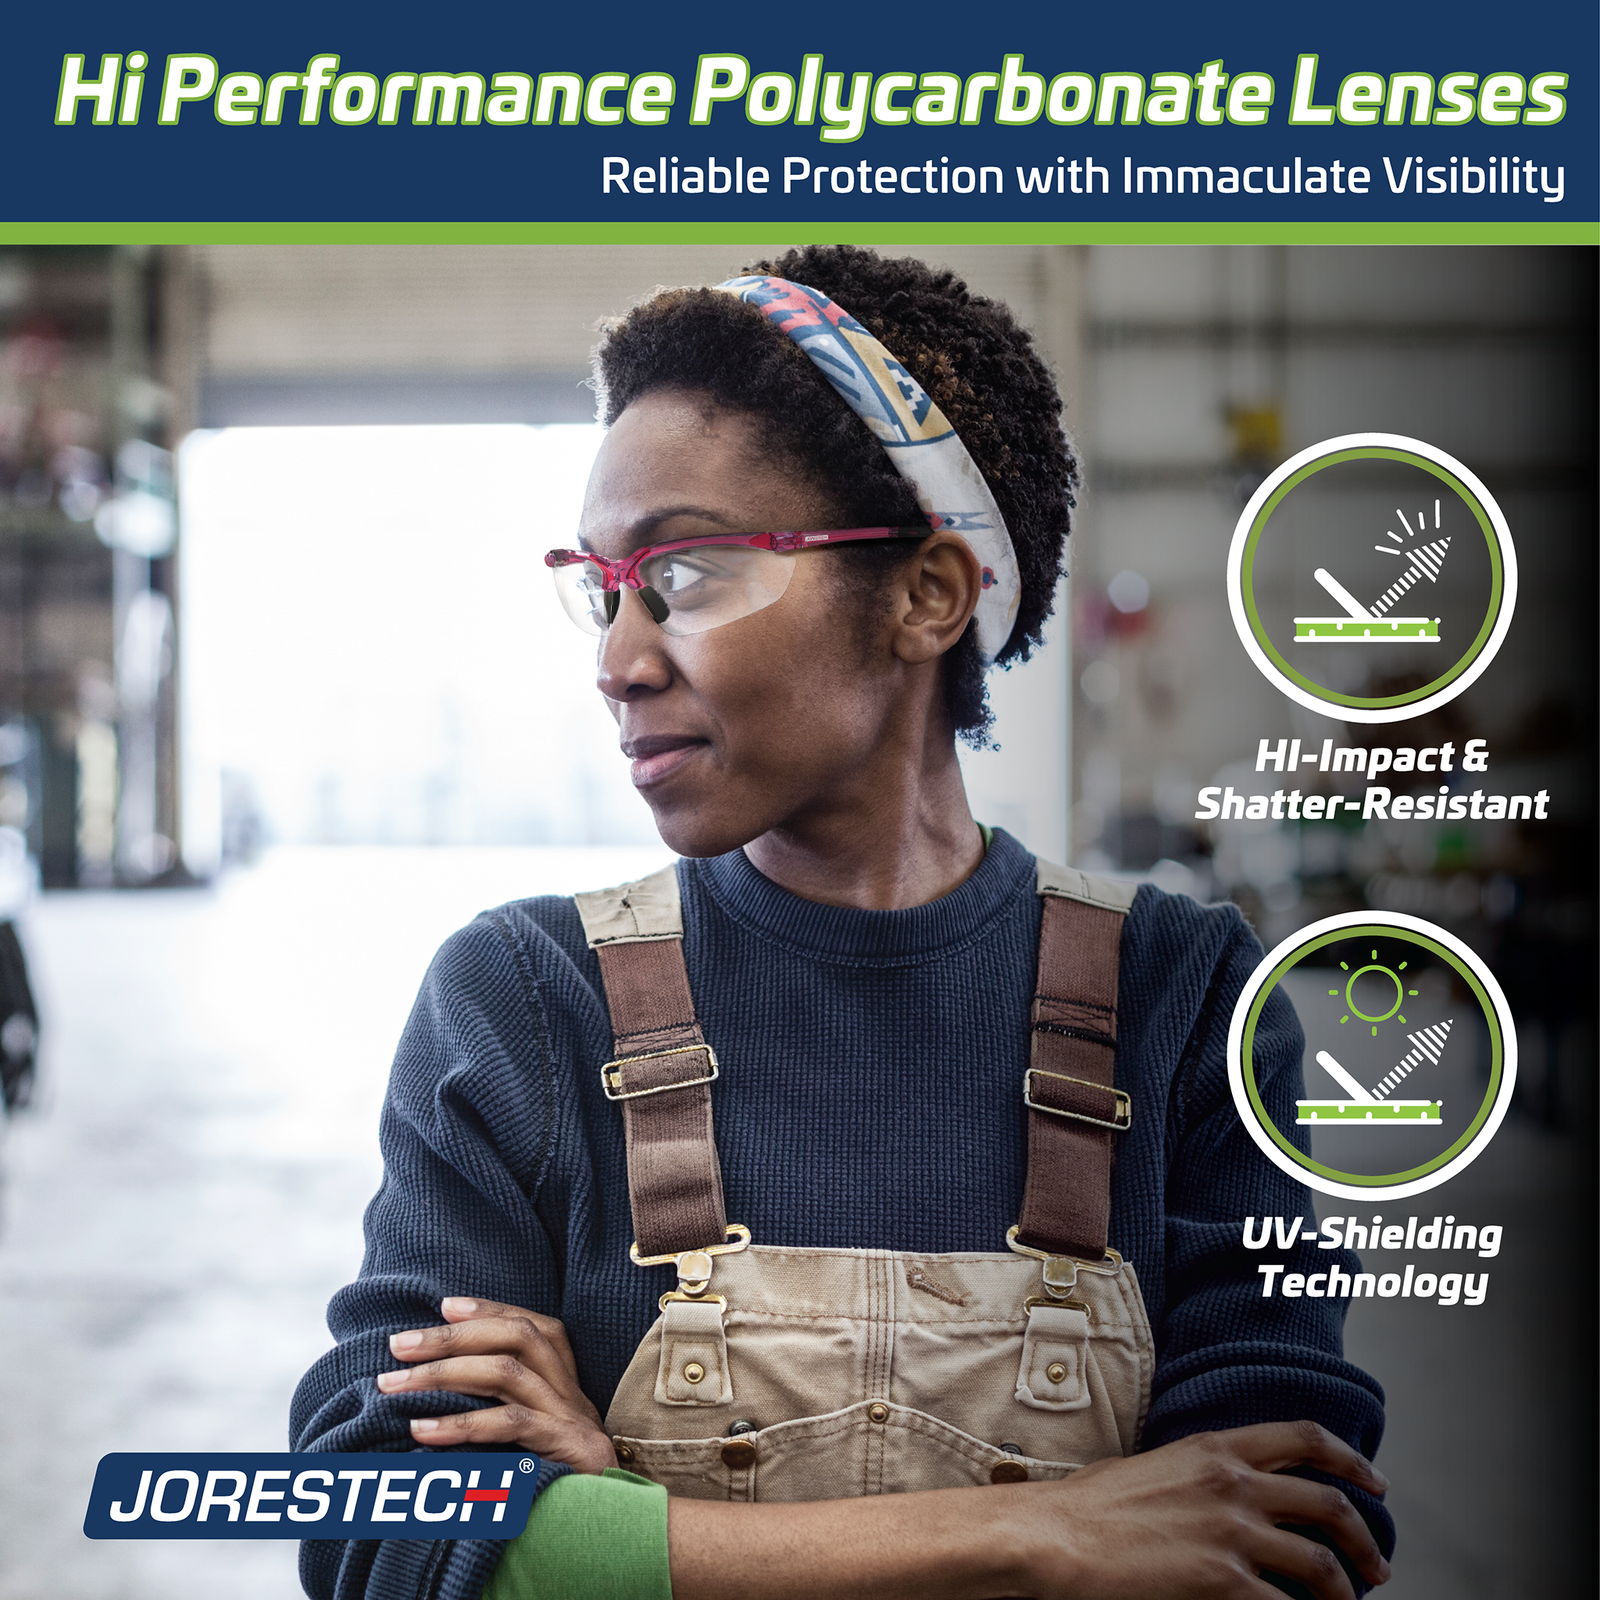 Jorestech Hi performance polycarbonate safety glasses  for high impact, shatter resistant and UV Technology